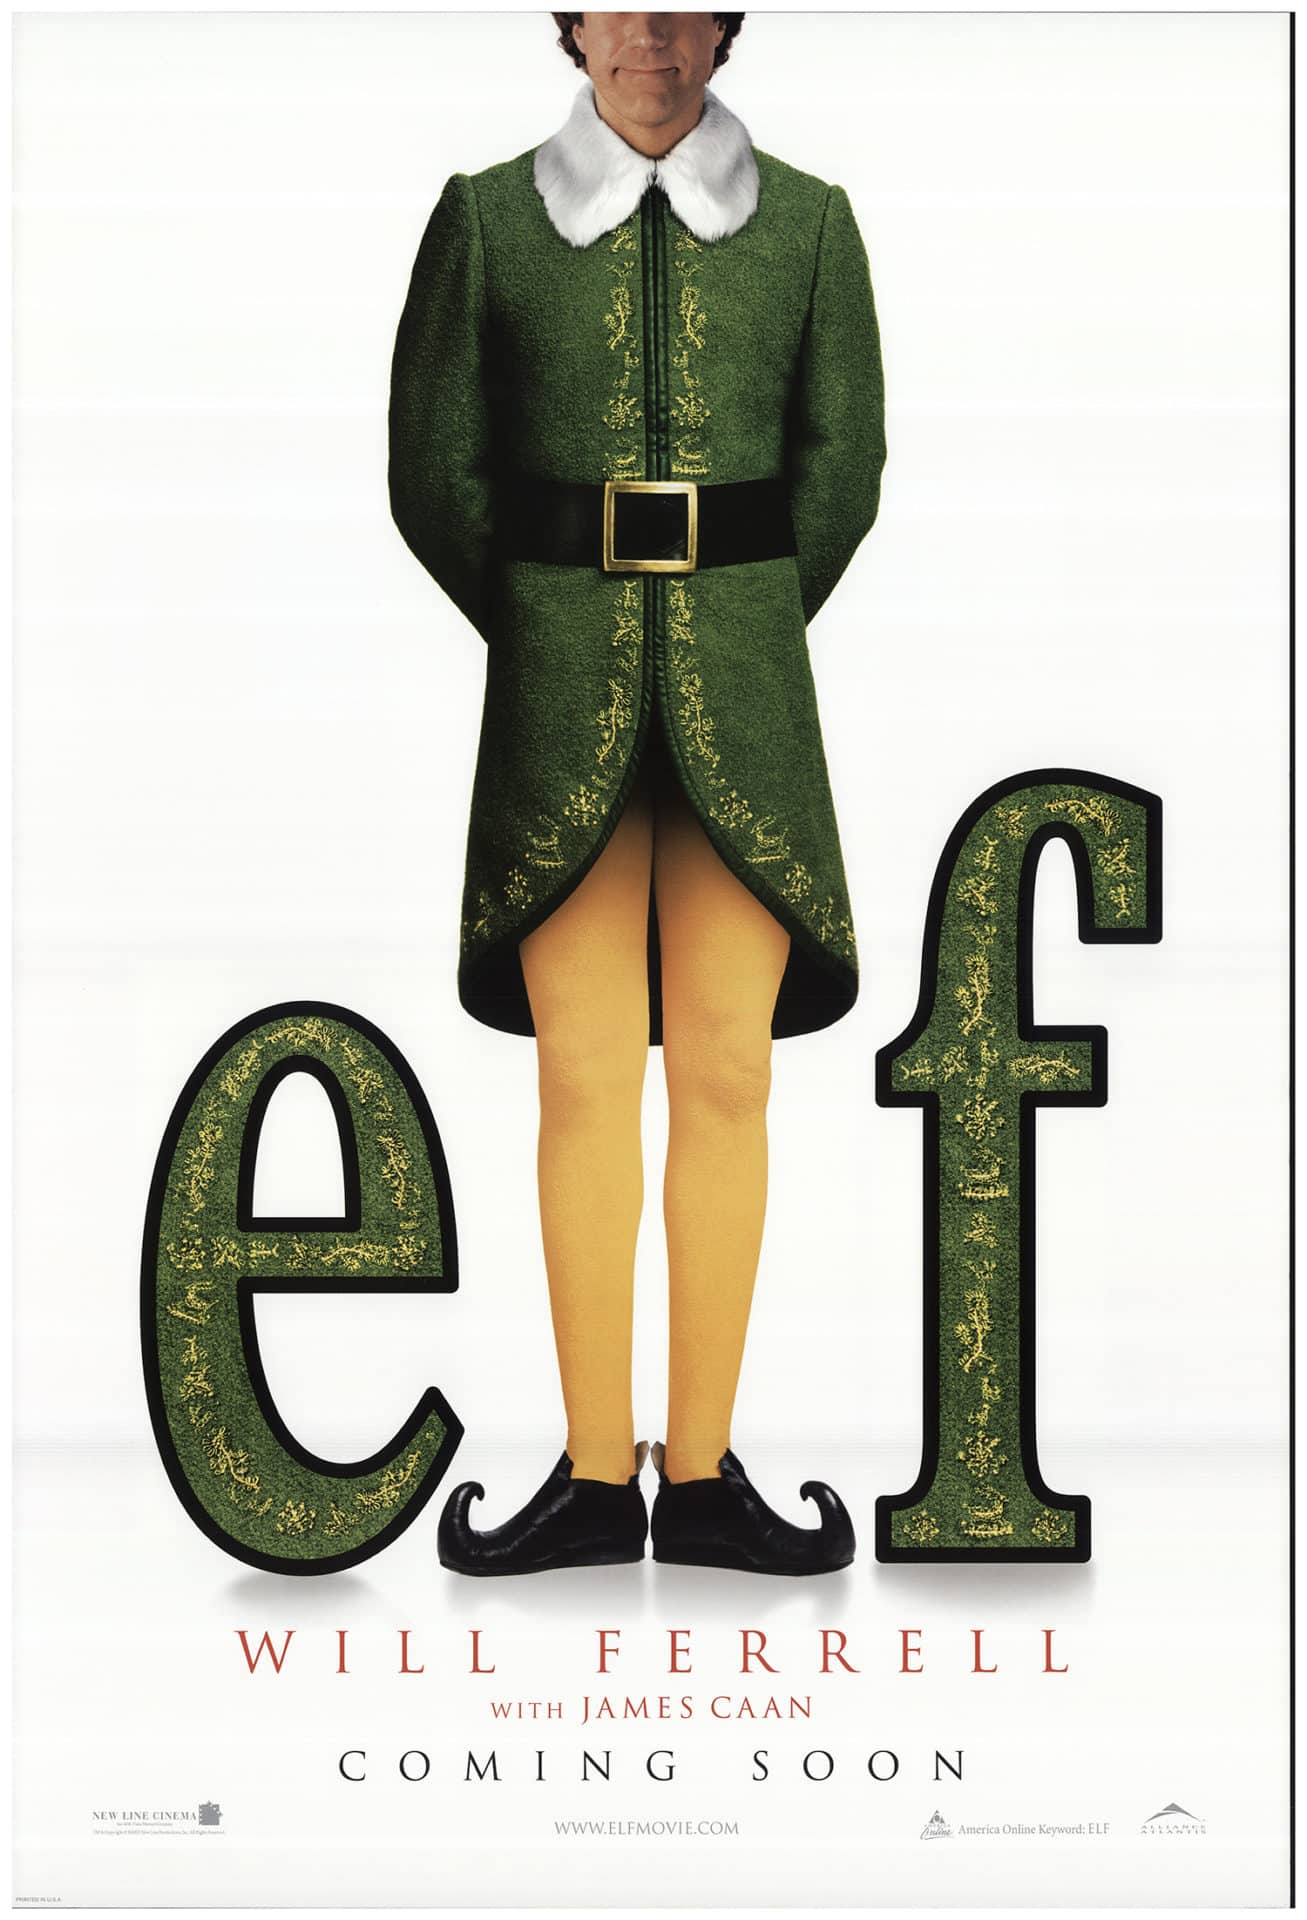 movie review on elf